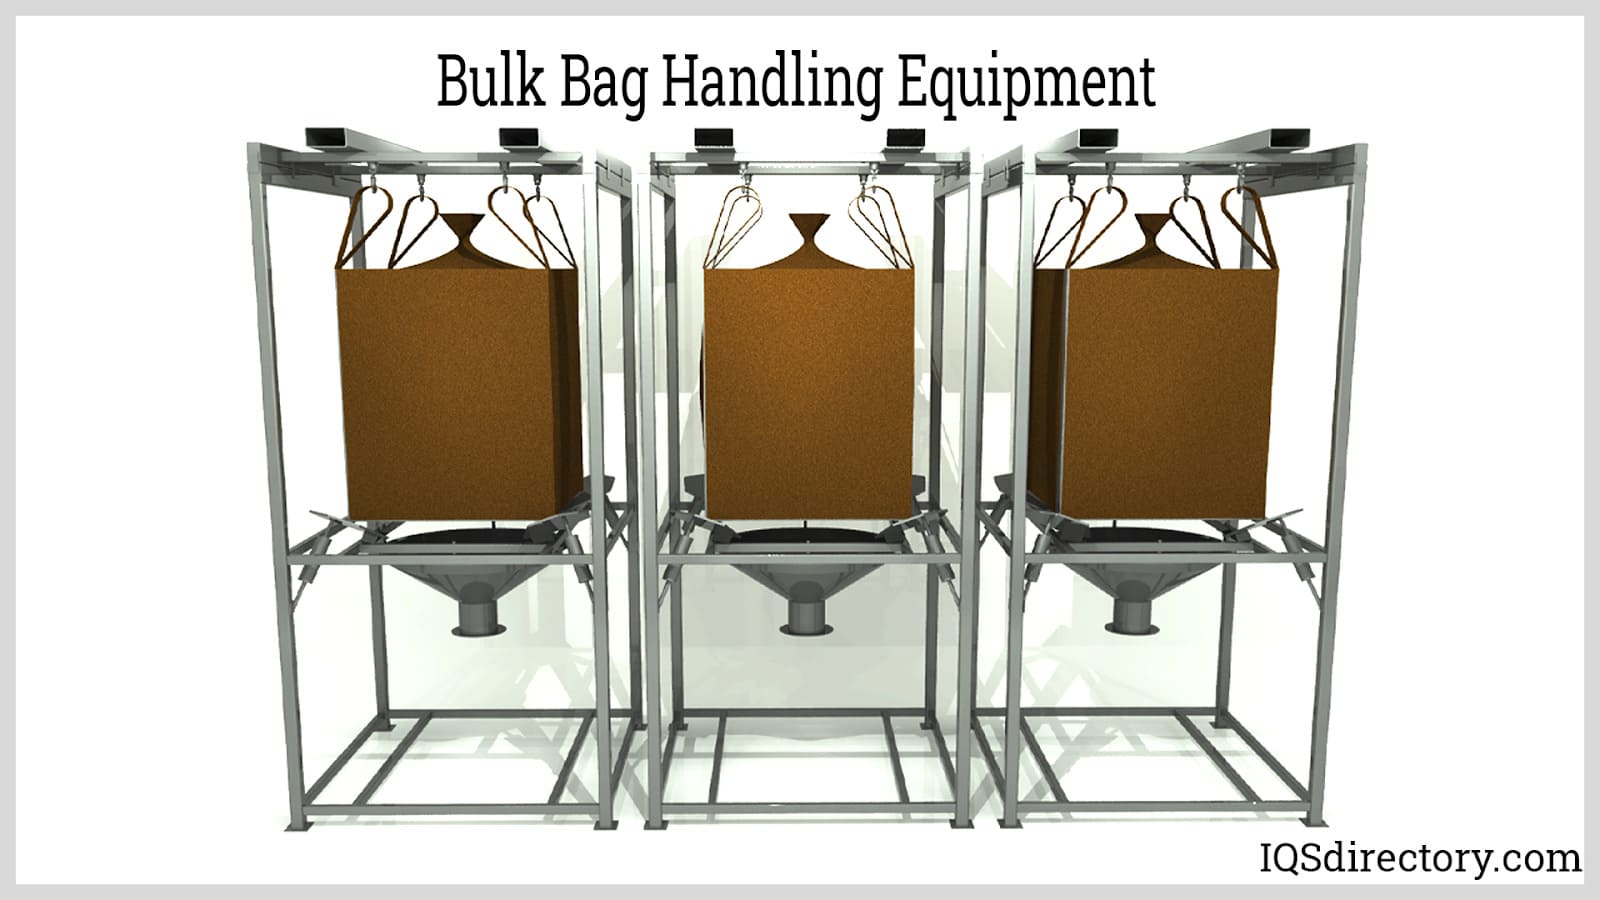 Bulk Bag Equipment: Types, Manufacturers, Applications, and Advantages